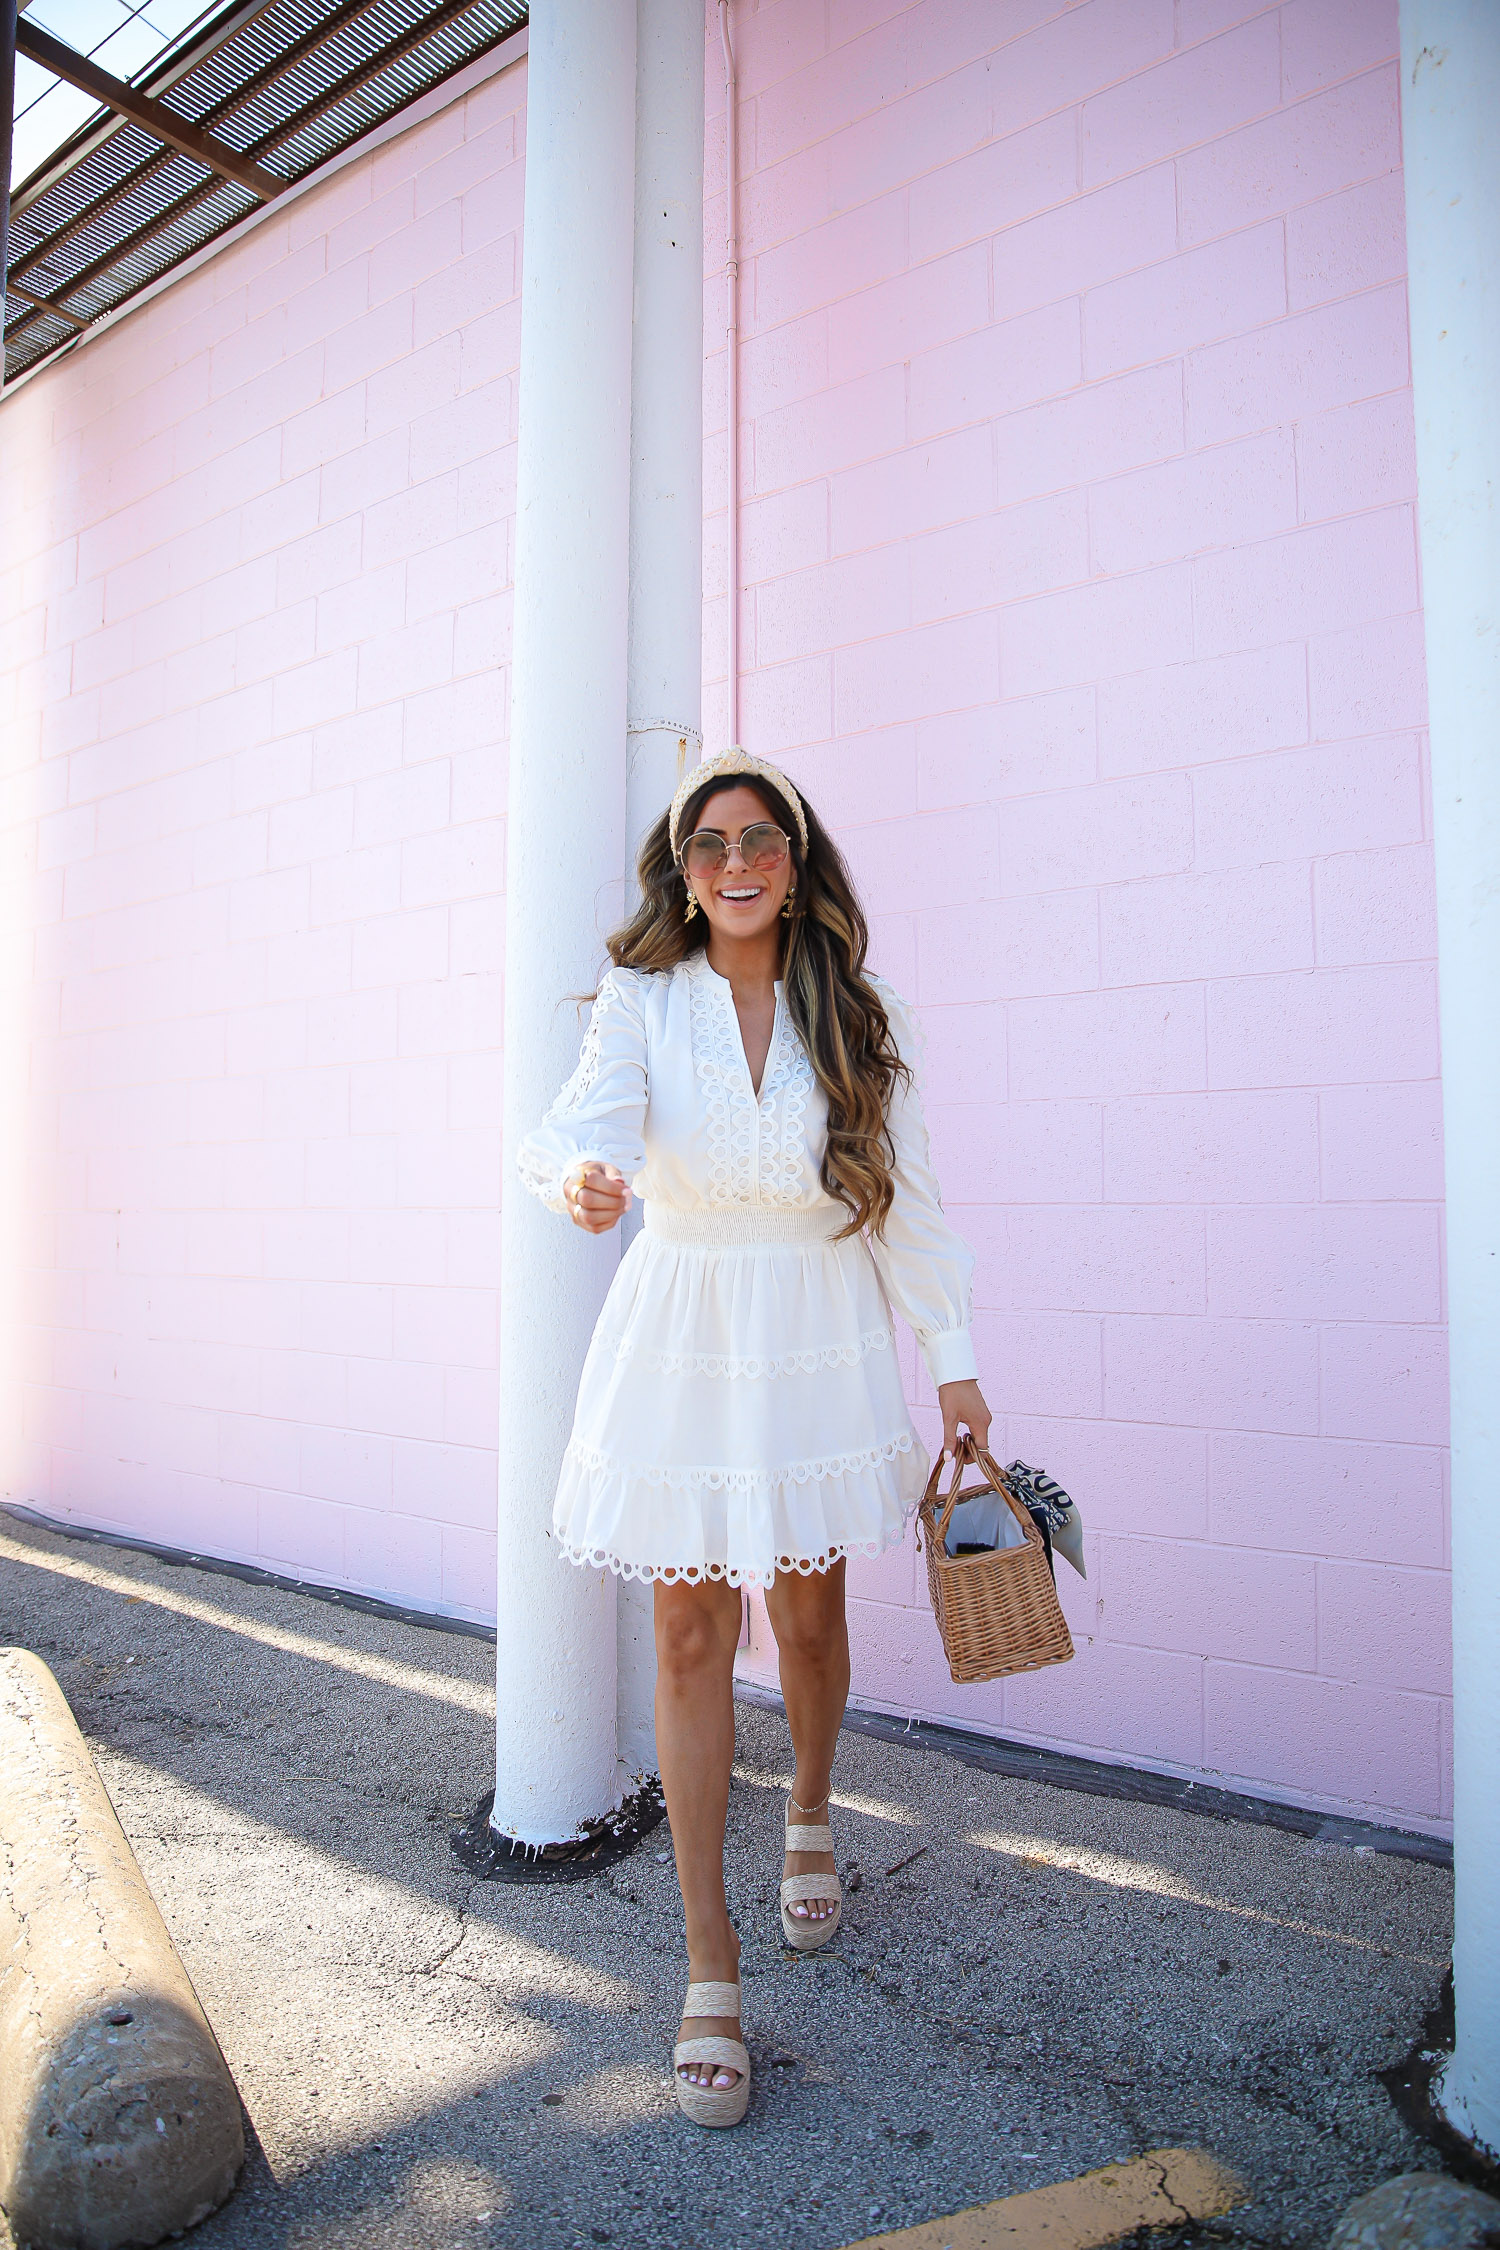 Zimmerman dress dupe, cute summer dresses 2020, endless rose dress, Nordstrom dresses 2020, the sweetest thing blog | Zimmermann Dress Dupe by popular US fashion blog, The Sweetest Thing: image of a woman standing front of a pink wall and wearing a Nordstrom ENDLESS ROSE Lace Trim Dress, Nordstrom STEVE MADDEN Jolted Platform Wedge Sandal, Nordstrom LELE SADOUGHI Crystal Embellished Headband, Nordstrom CHARLOTTE TILBURY Lip Cheat Lip Liner, Nordstrom CHARLOTTE TILBURY Hot Lips Lipstick, Nordstrom TOM FORD Gloss Luxe Moisturizing Lipgloss, Rolex watch, Cartier ring, Dior ring, Chanel earrings, and a Christian Dior scarf. 